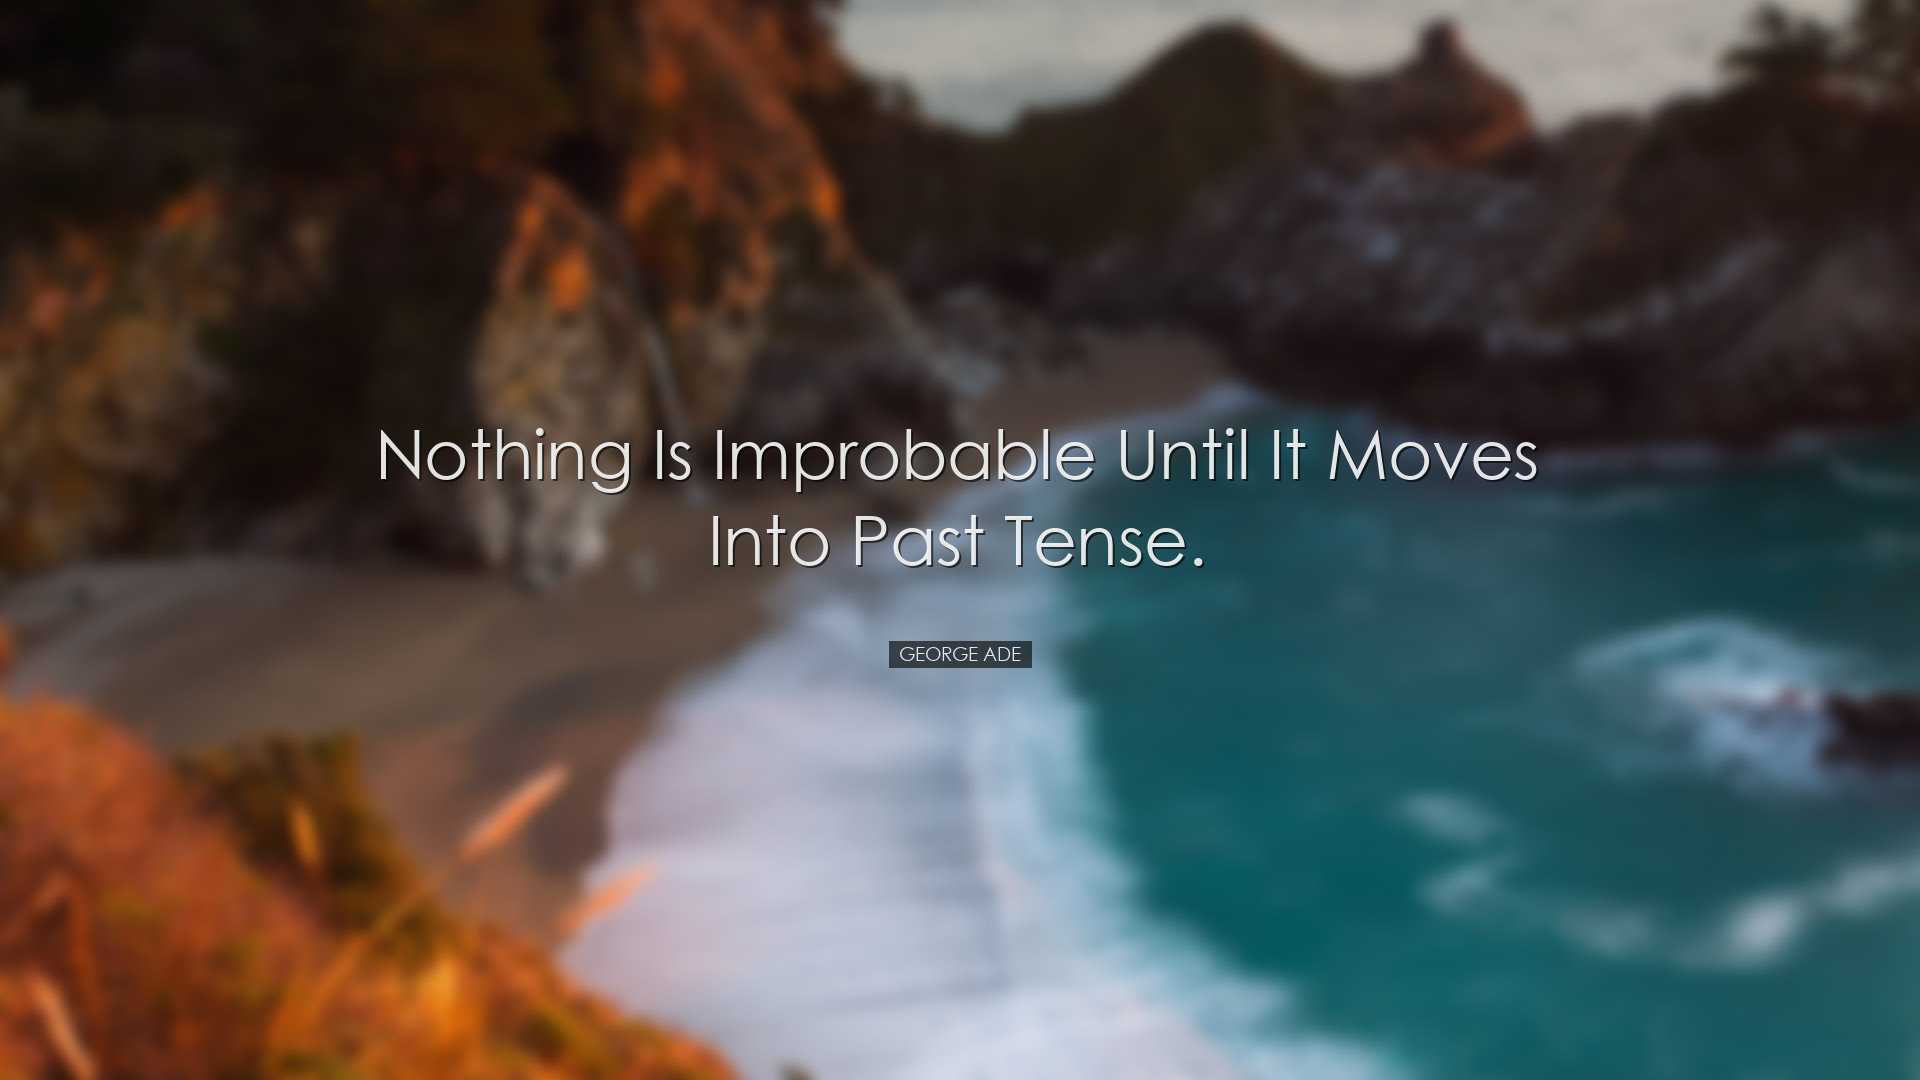 Nothing is improbable until it moves into past tense. - George Ade